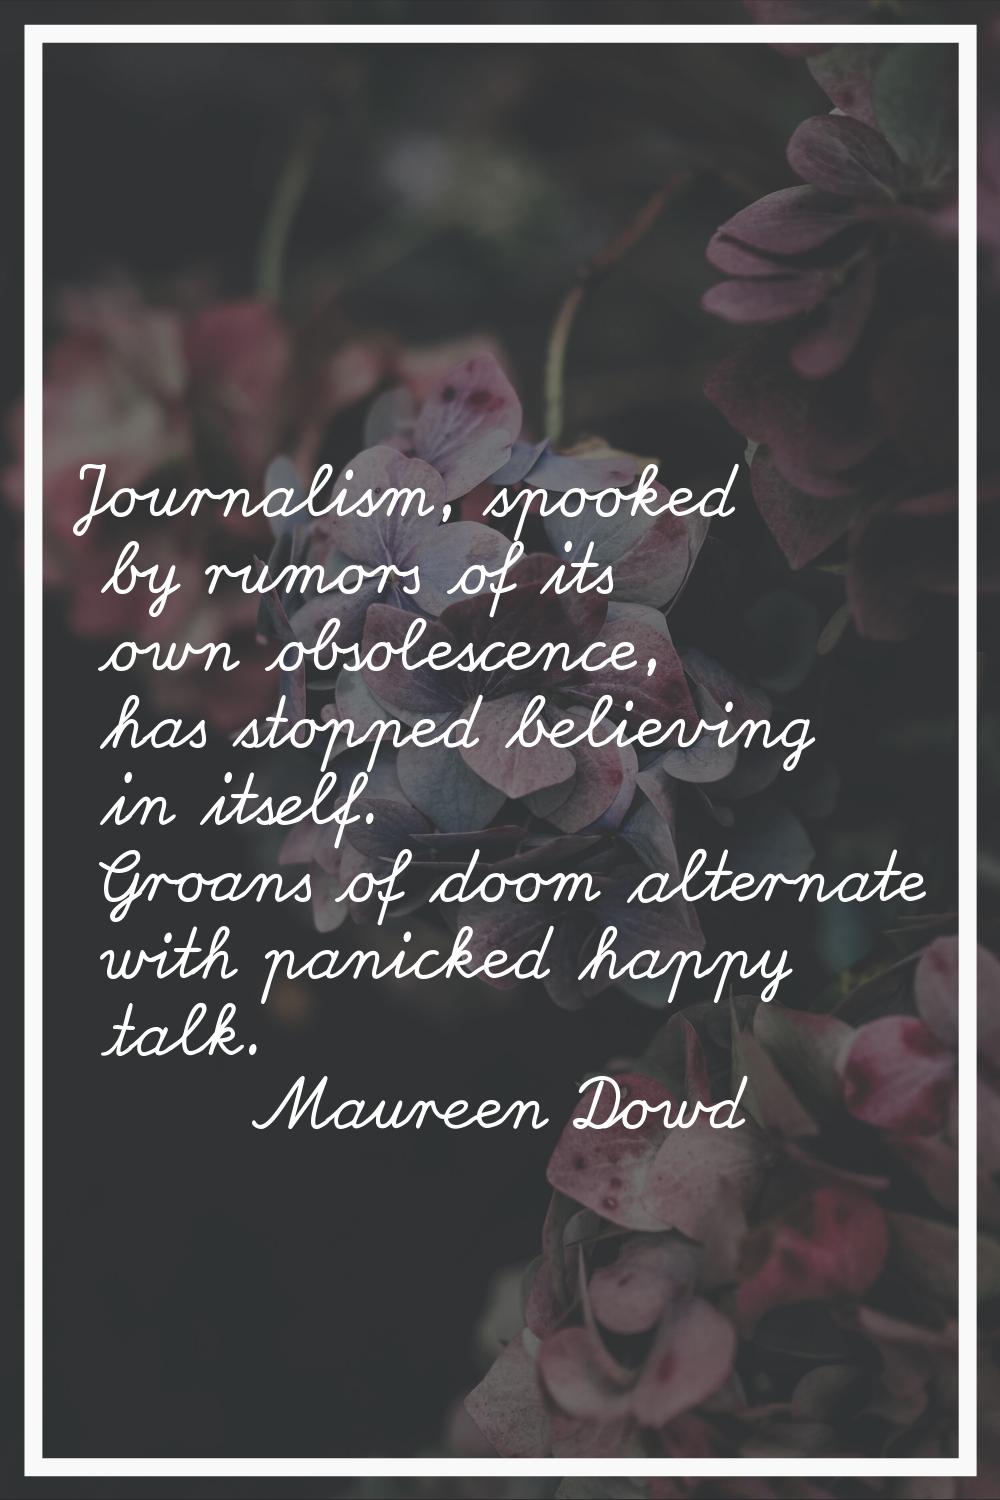 Journalism, spooked by rumors of its own obsolescence, has stopped believing in itself. Groans of d